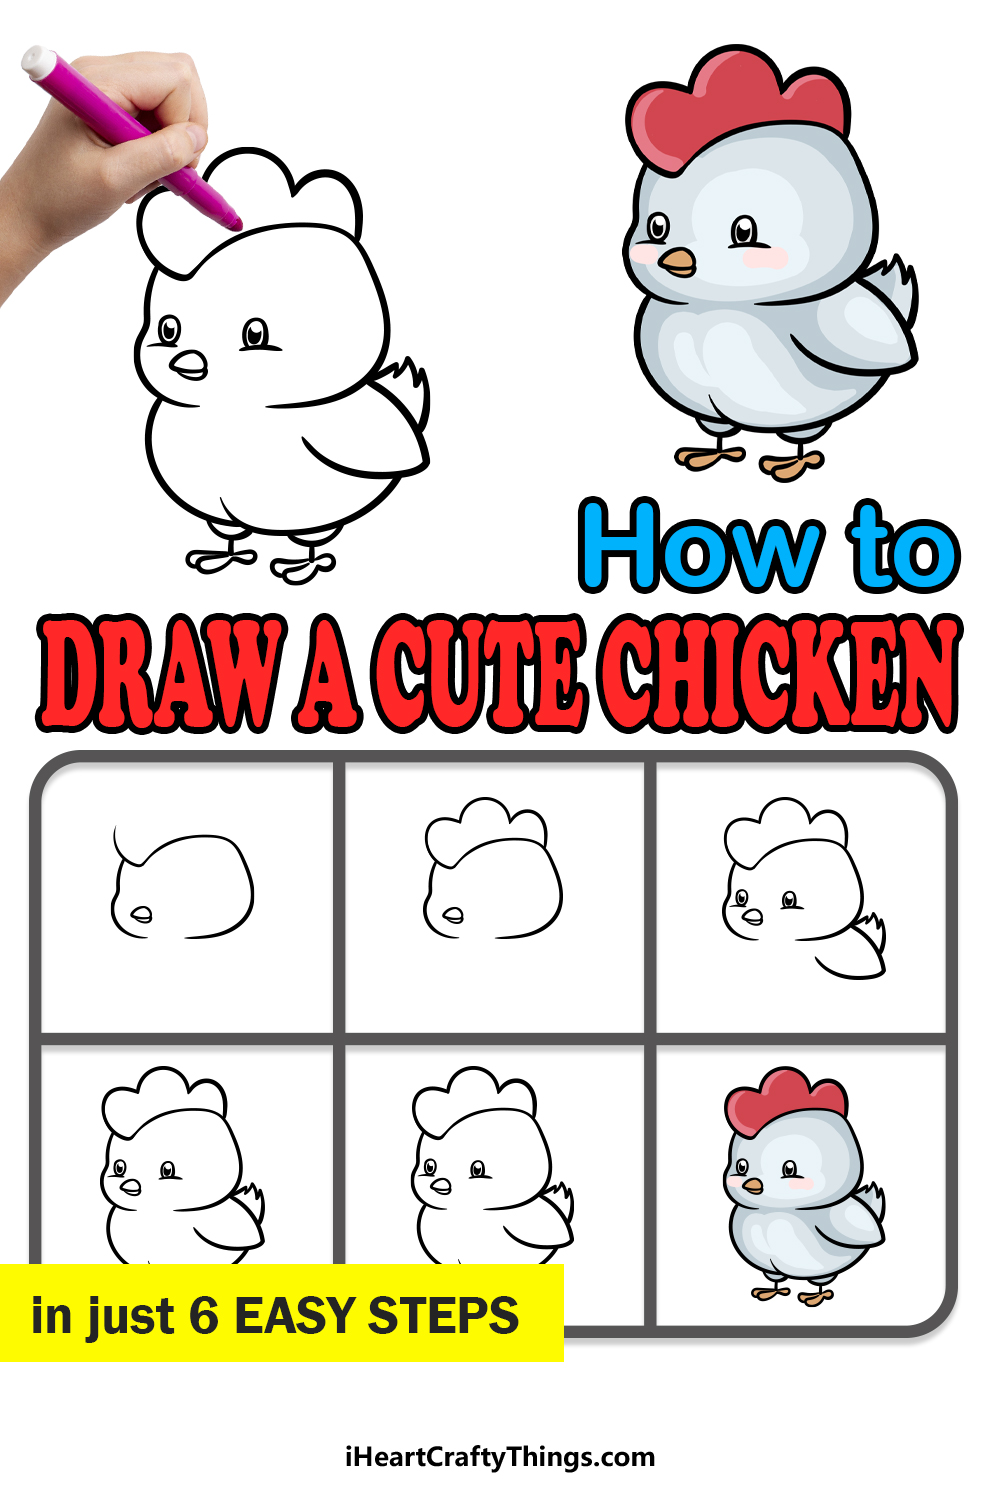 how to draw a Cute Chicken in 6 easy steps